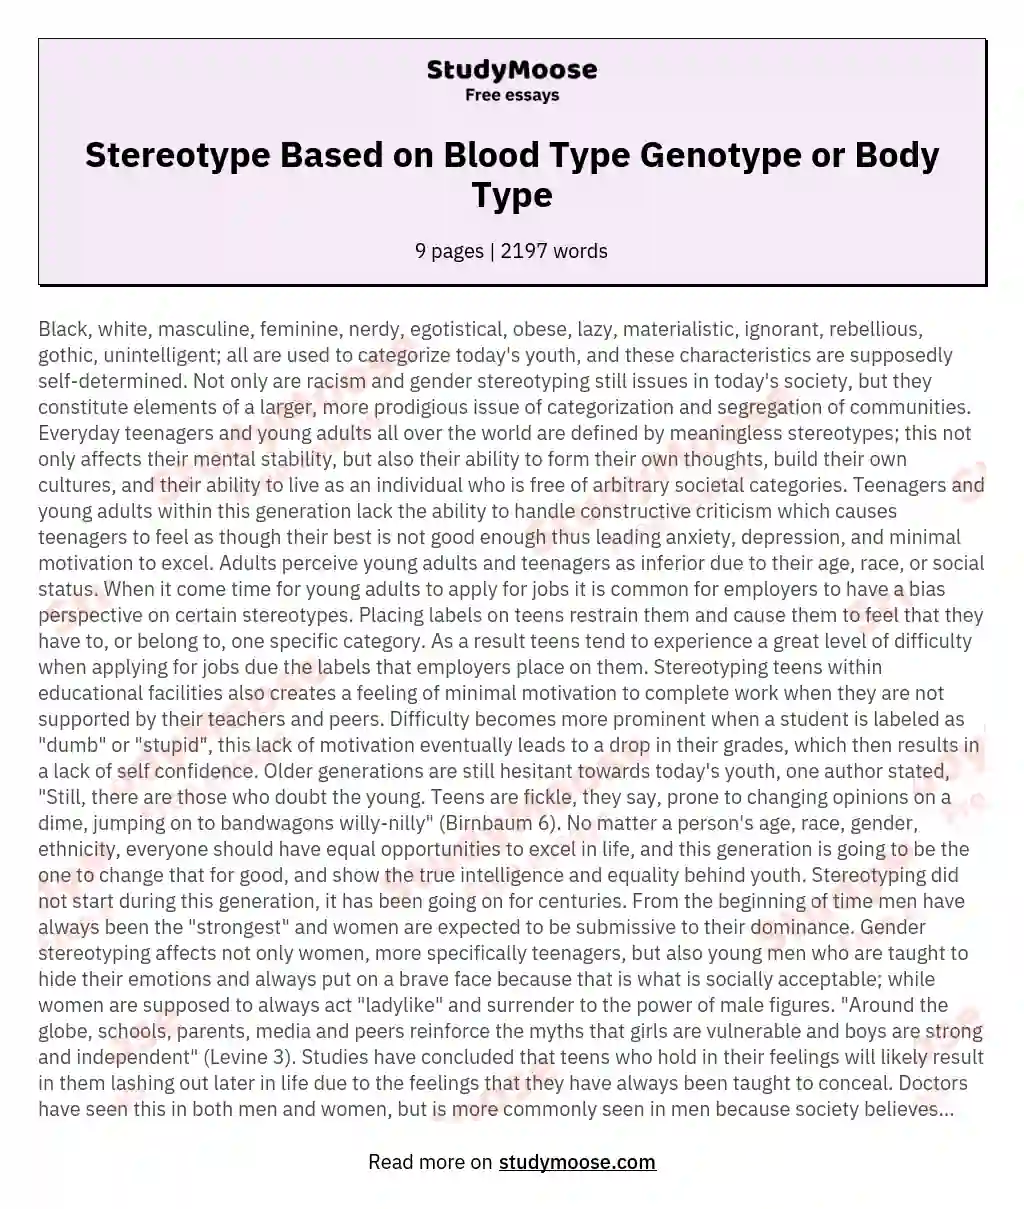 Stereotype Based on Blood Type Genotype or Body Type